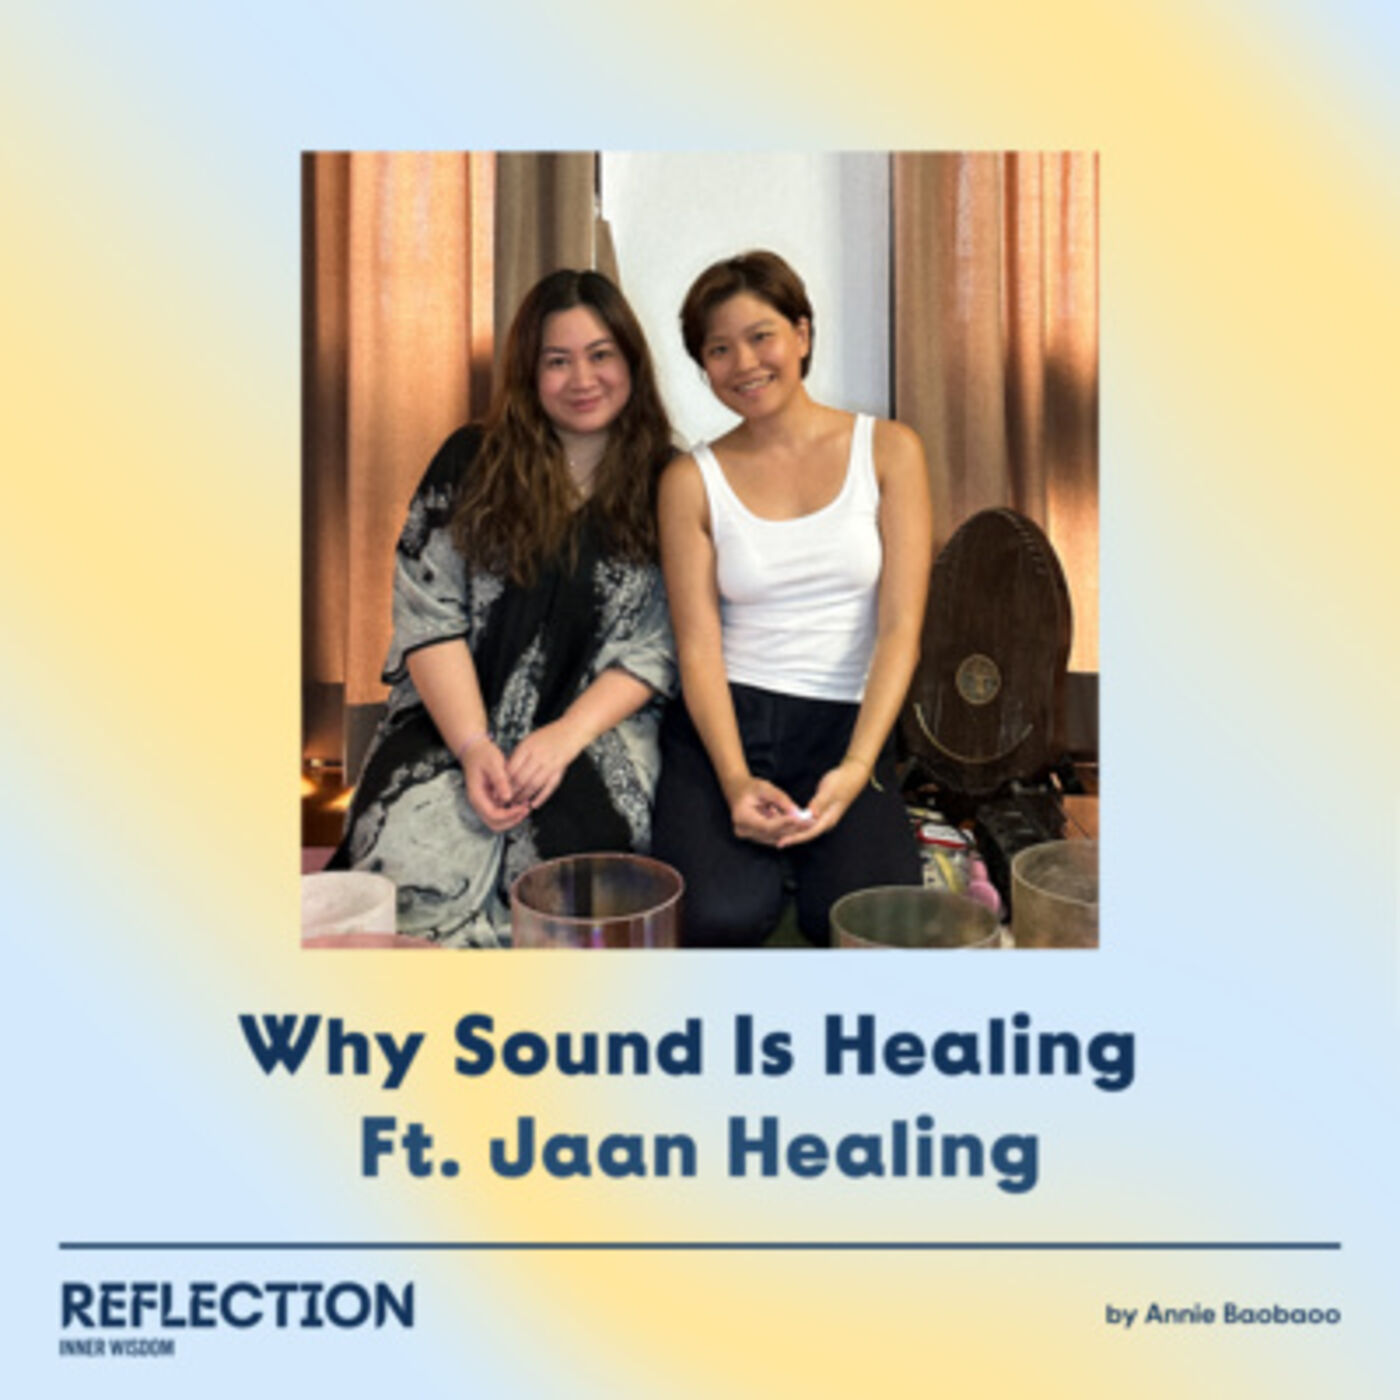 EP. 15 Why Sound Is Healing Ft. Jaan Healing